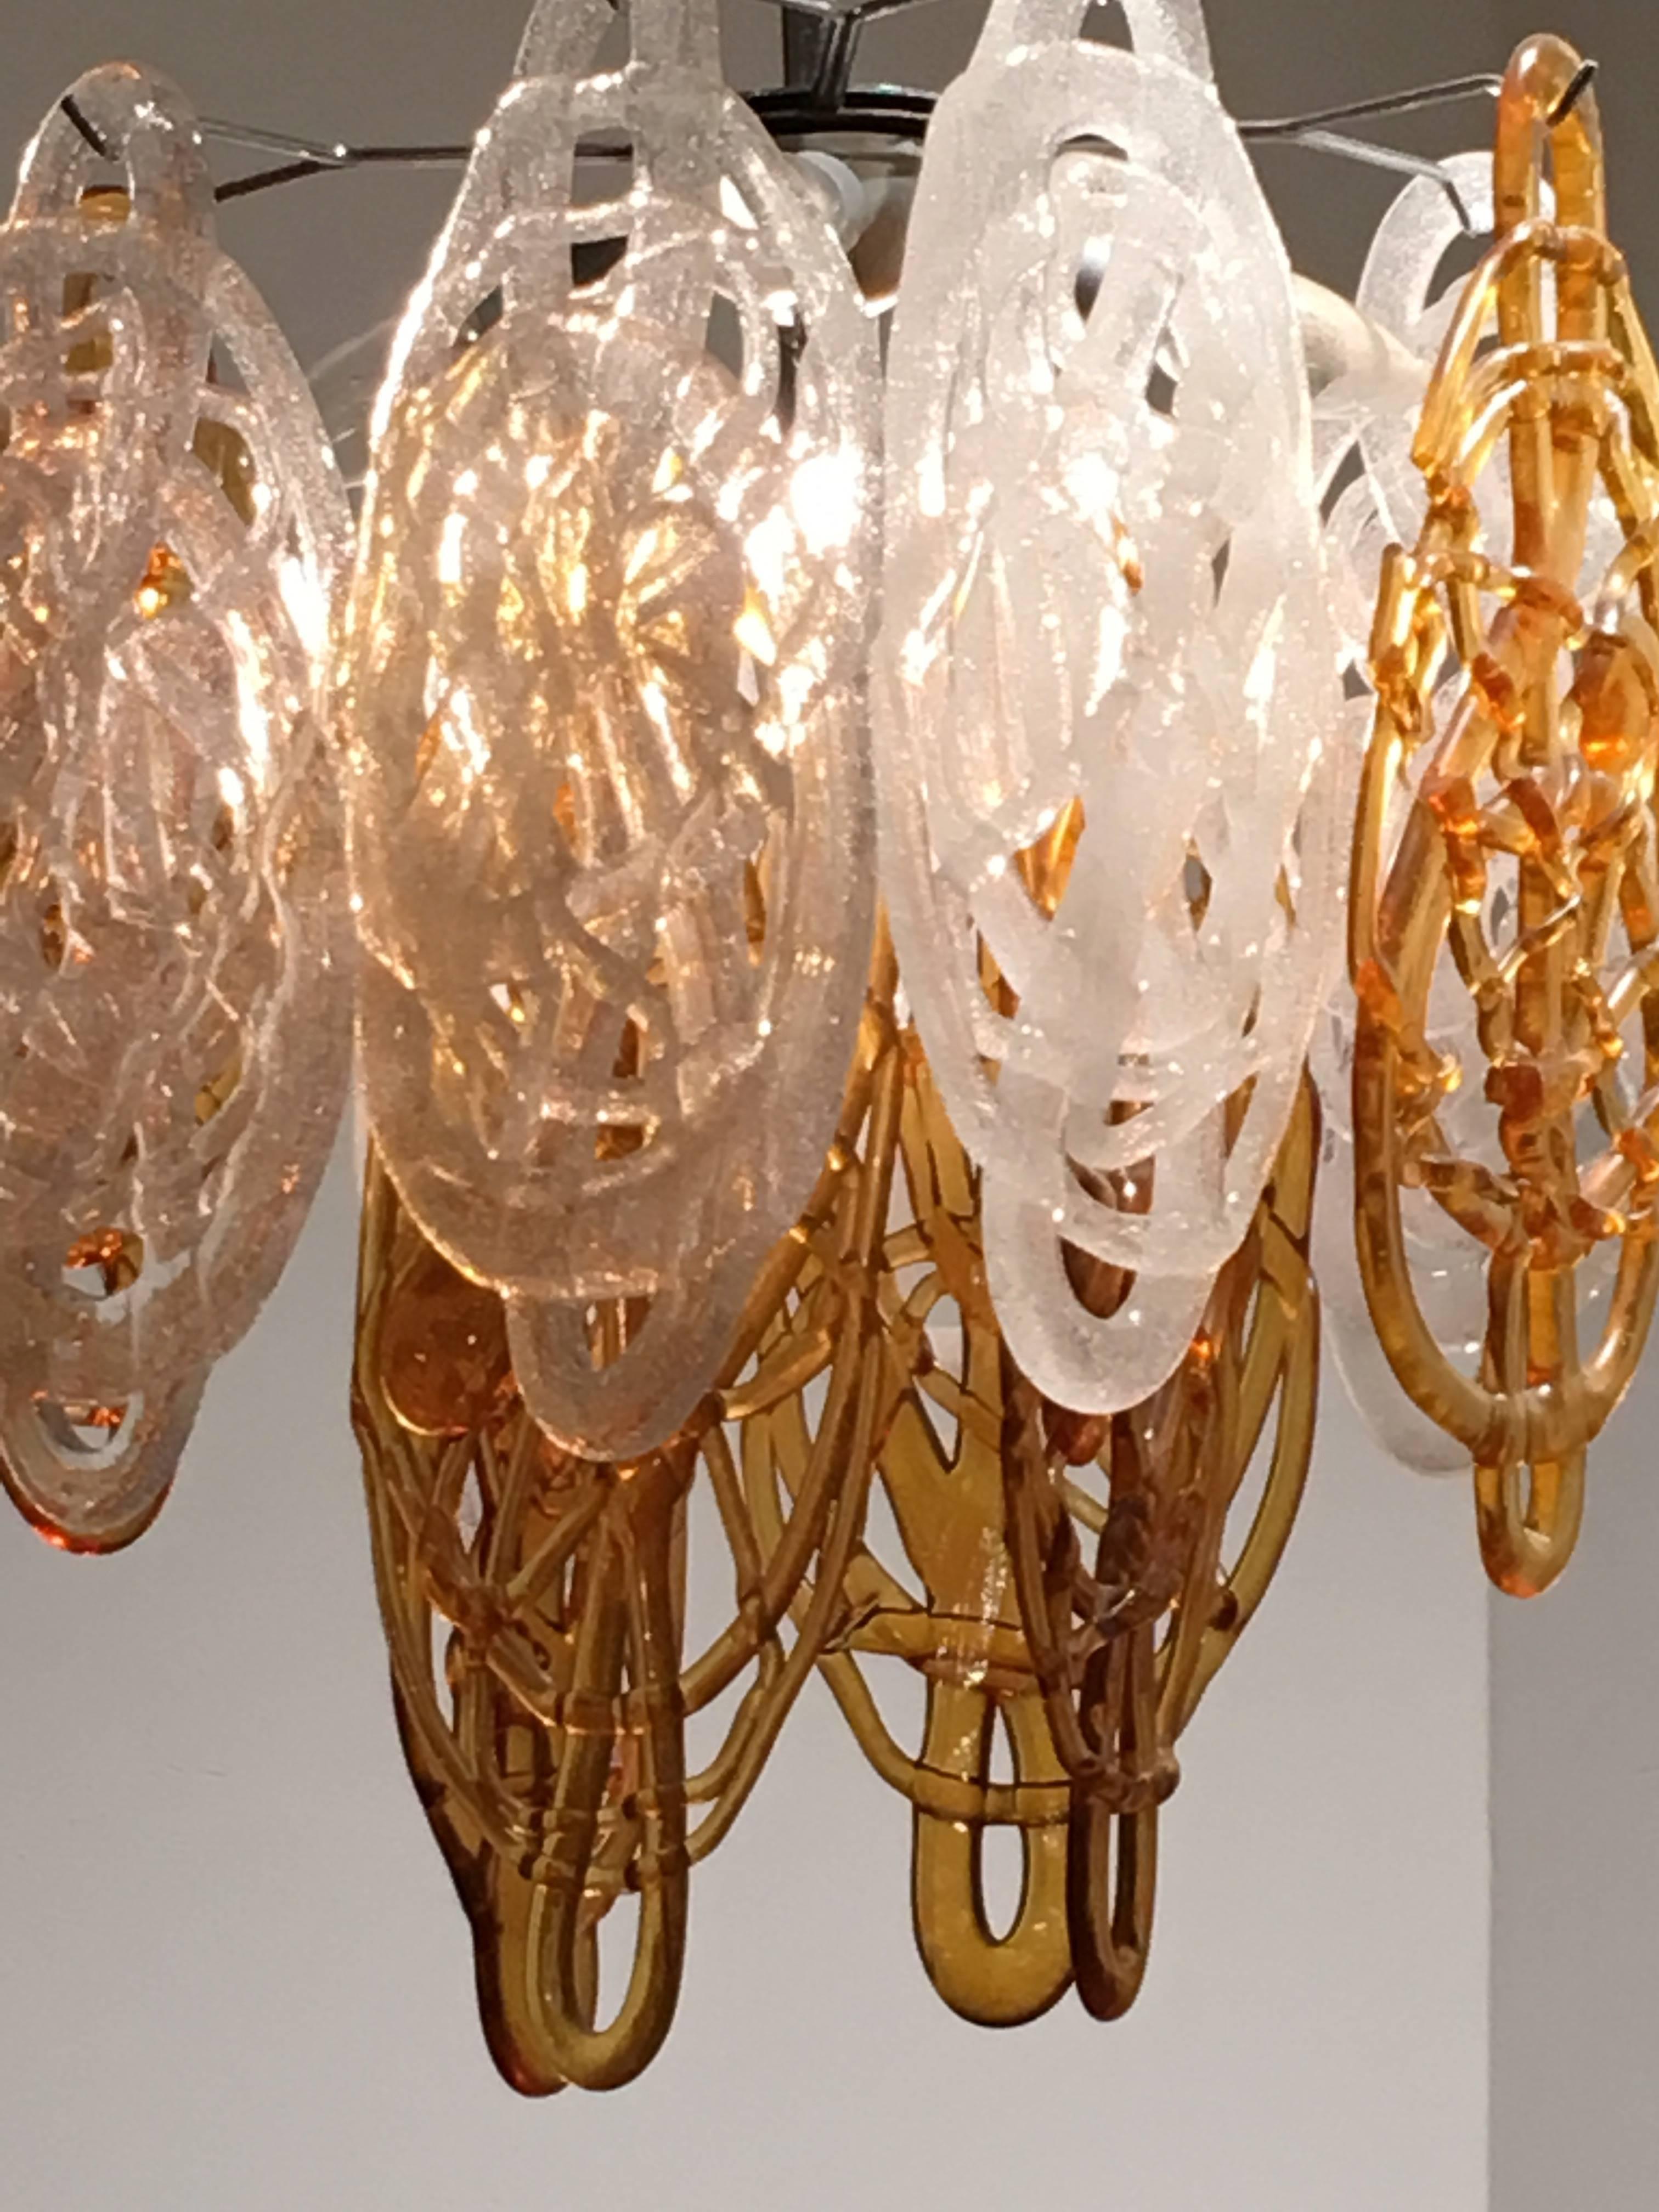 Beautiful atmospheric Vistosi chandelier with in Spaghetti style discs in mouth-blown glass threads, brown and opal.
Metal frame chromed with 12 glass discs, five lightbulbs.